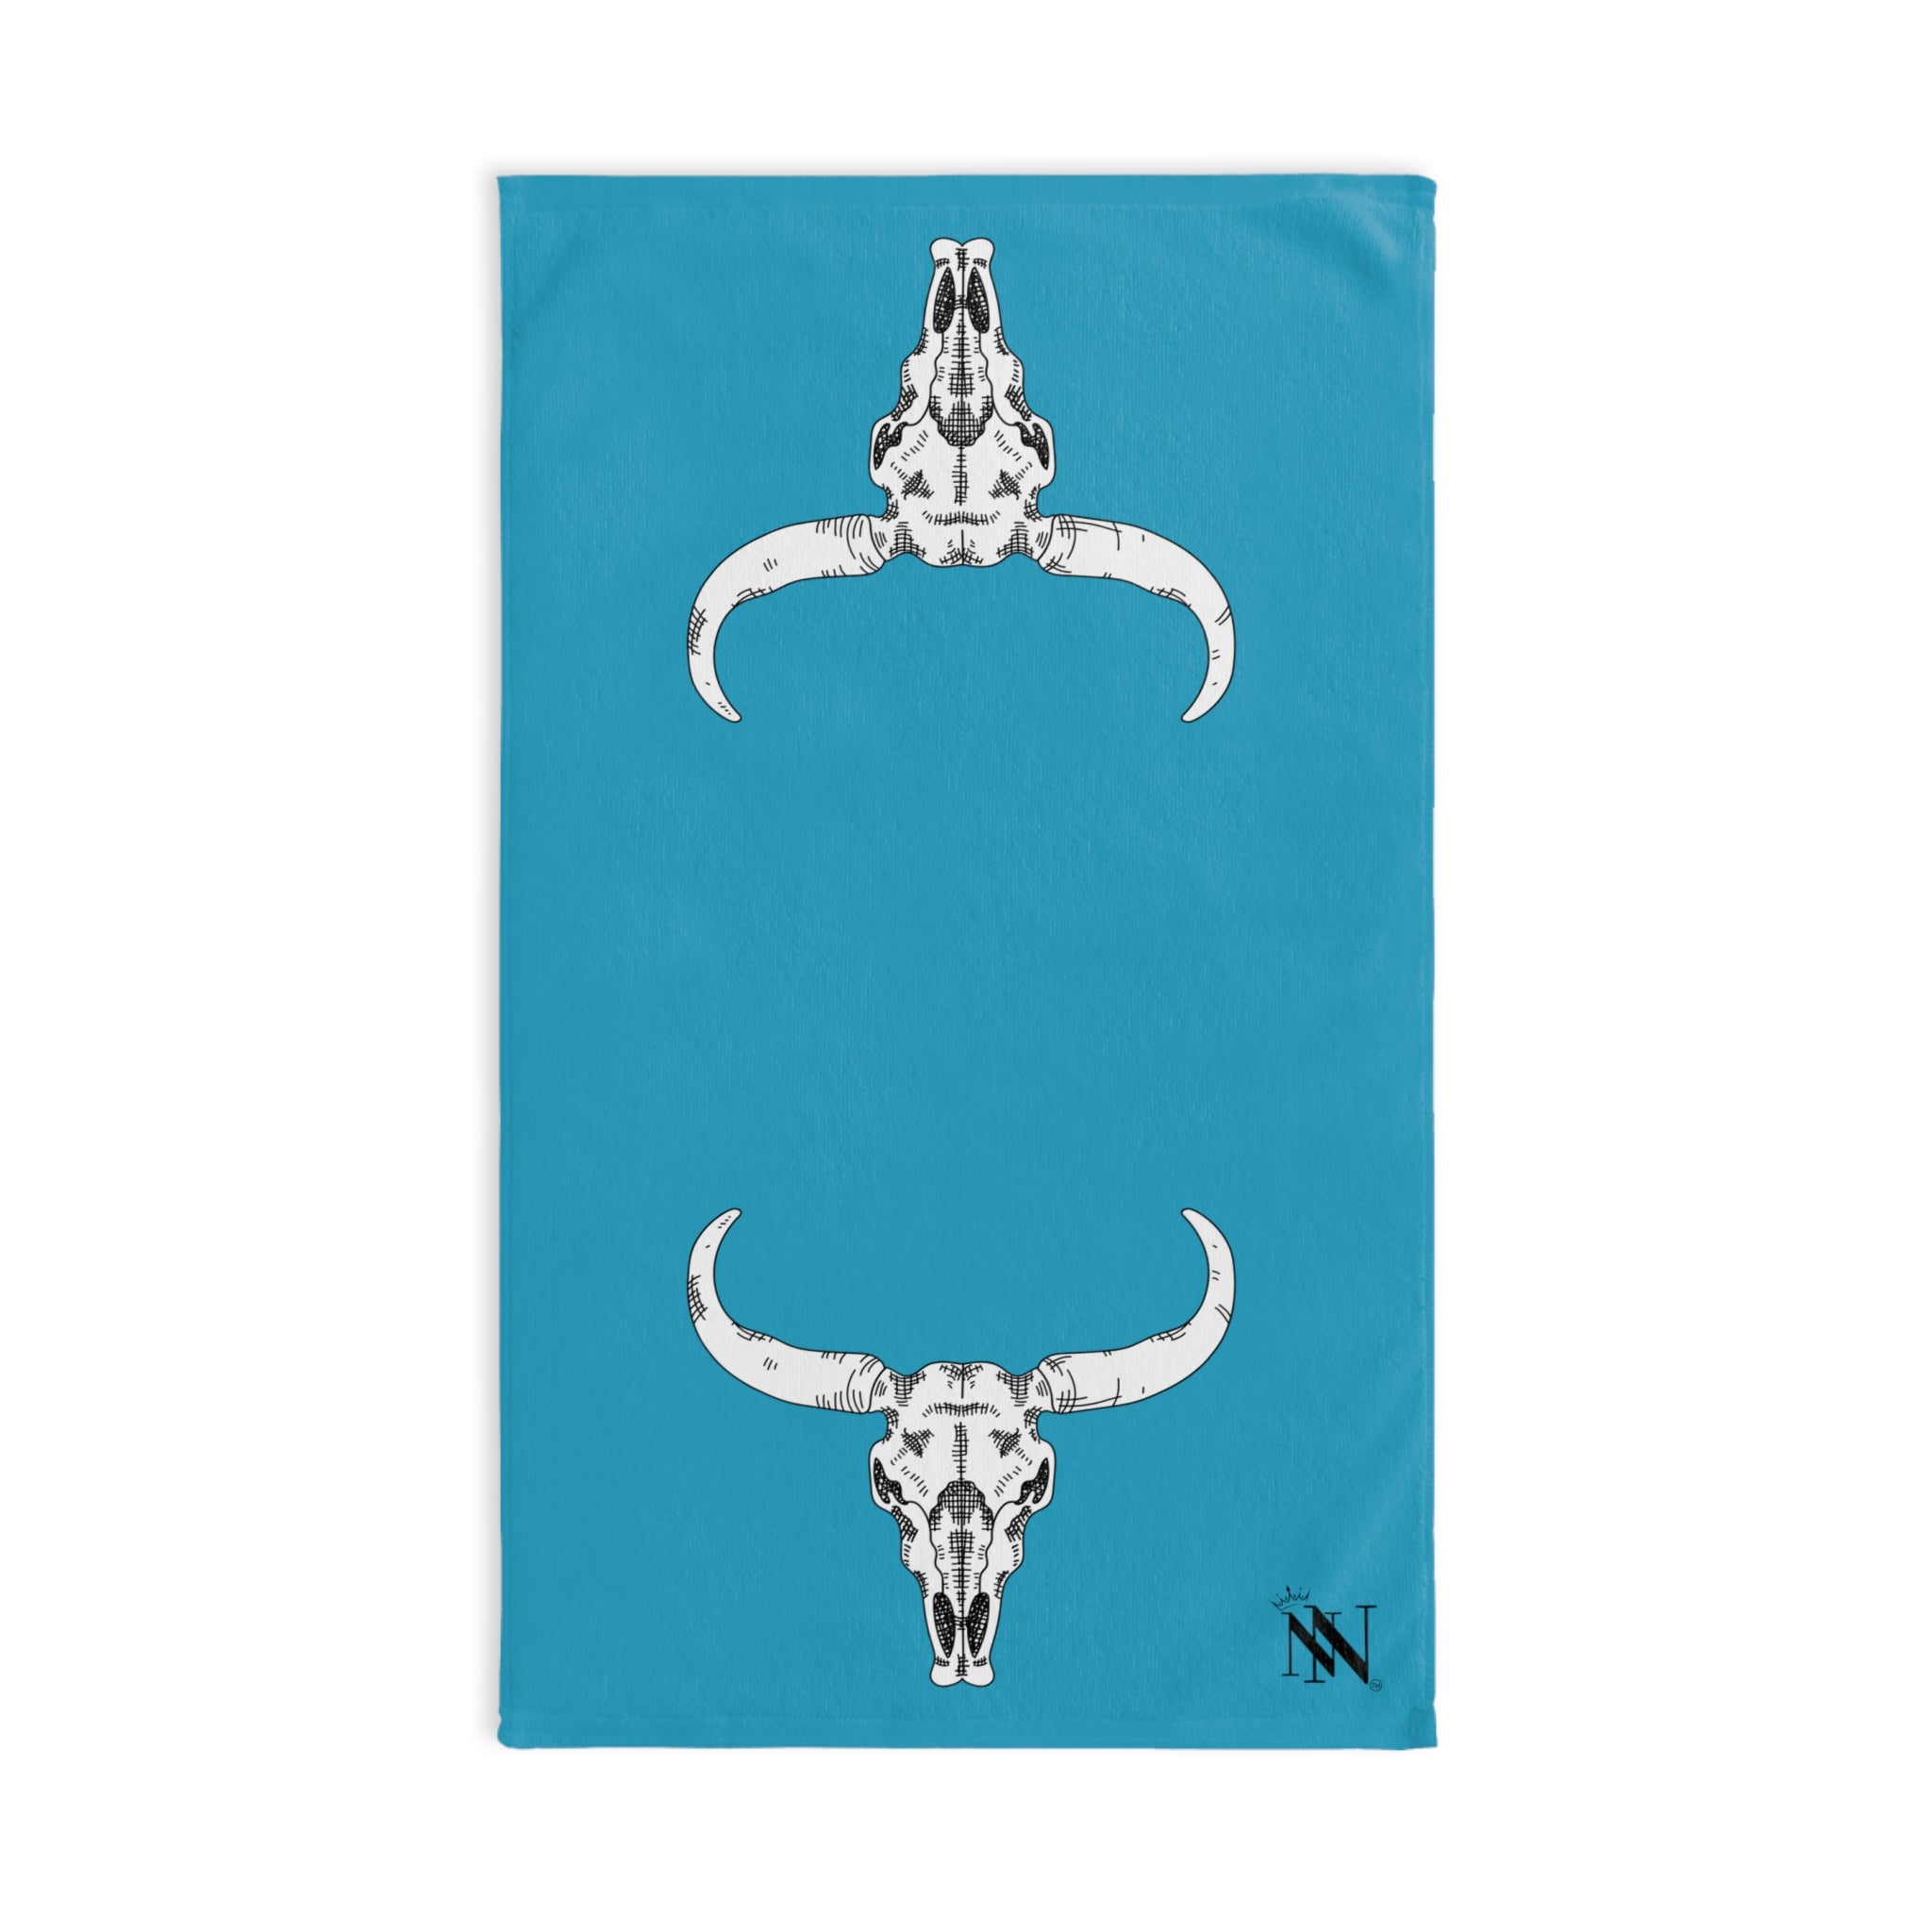 Black Mr Mrs Cow Skull Teal | Novelty Gifts for Boyfriend, Funny Towel Romantic Gift for Wedding Couple Fiance First Year Anniversary Valentines, Party Gag Gifts, Joke Humor Cloth for Husband Men BF NECTAR NAPKINS